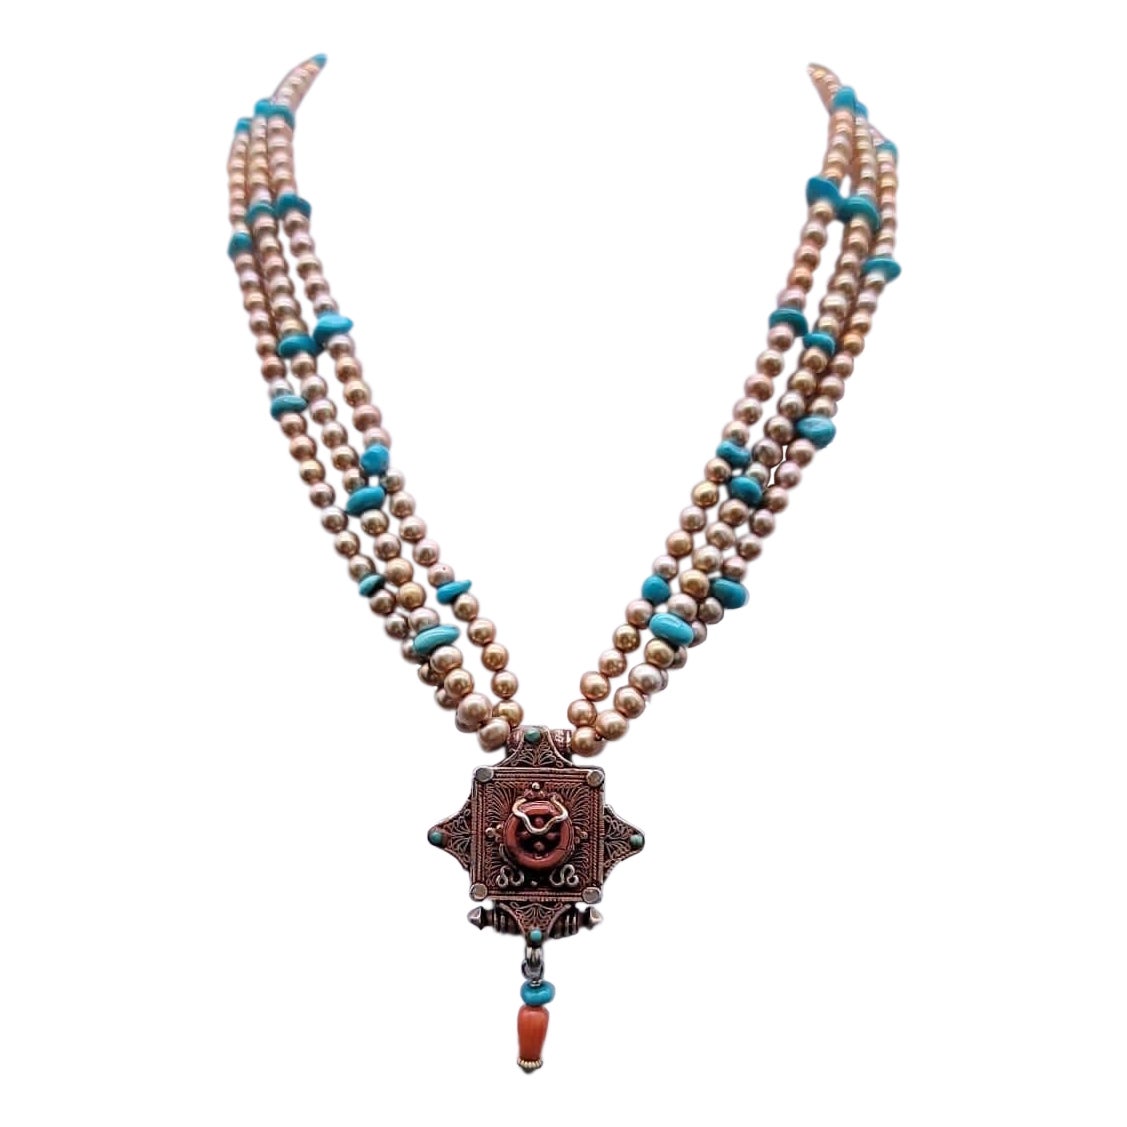 A.Jeschel  Stunning Freswater pearl necklace with a Vintage Tibetan pendant . For Sale